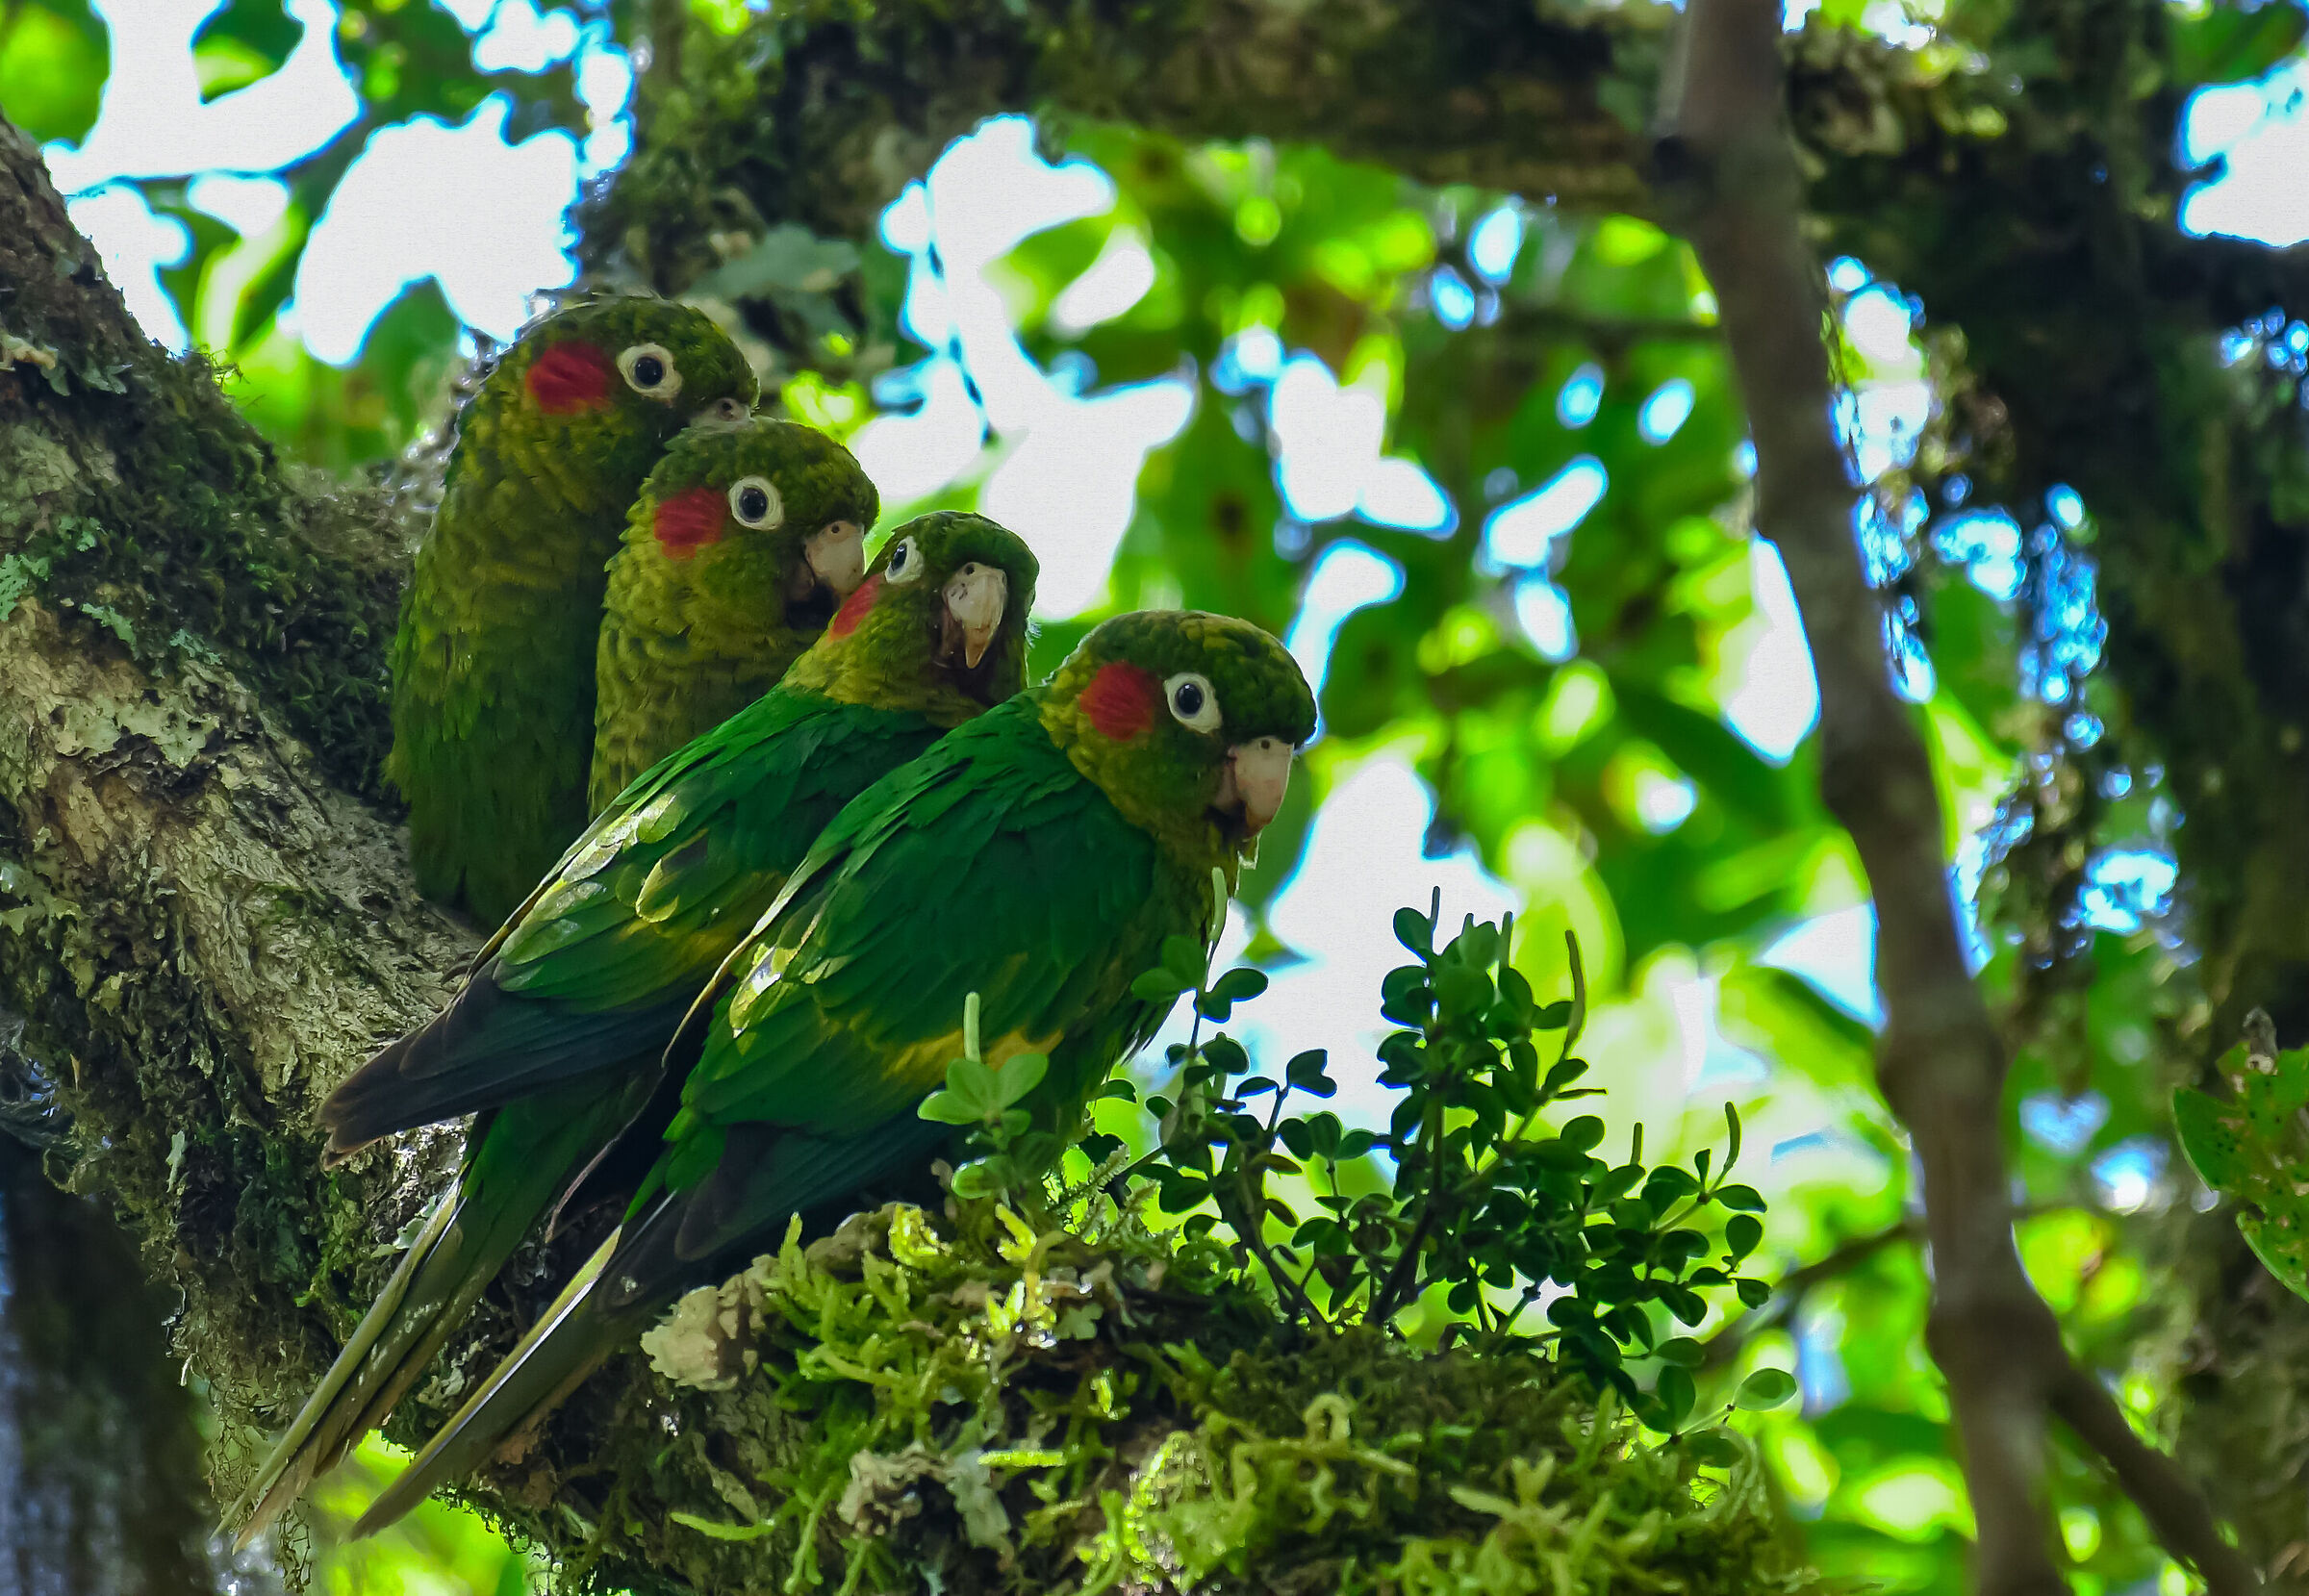 The parakeets family...